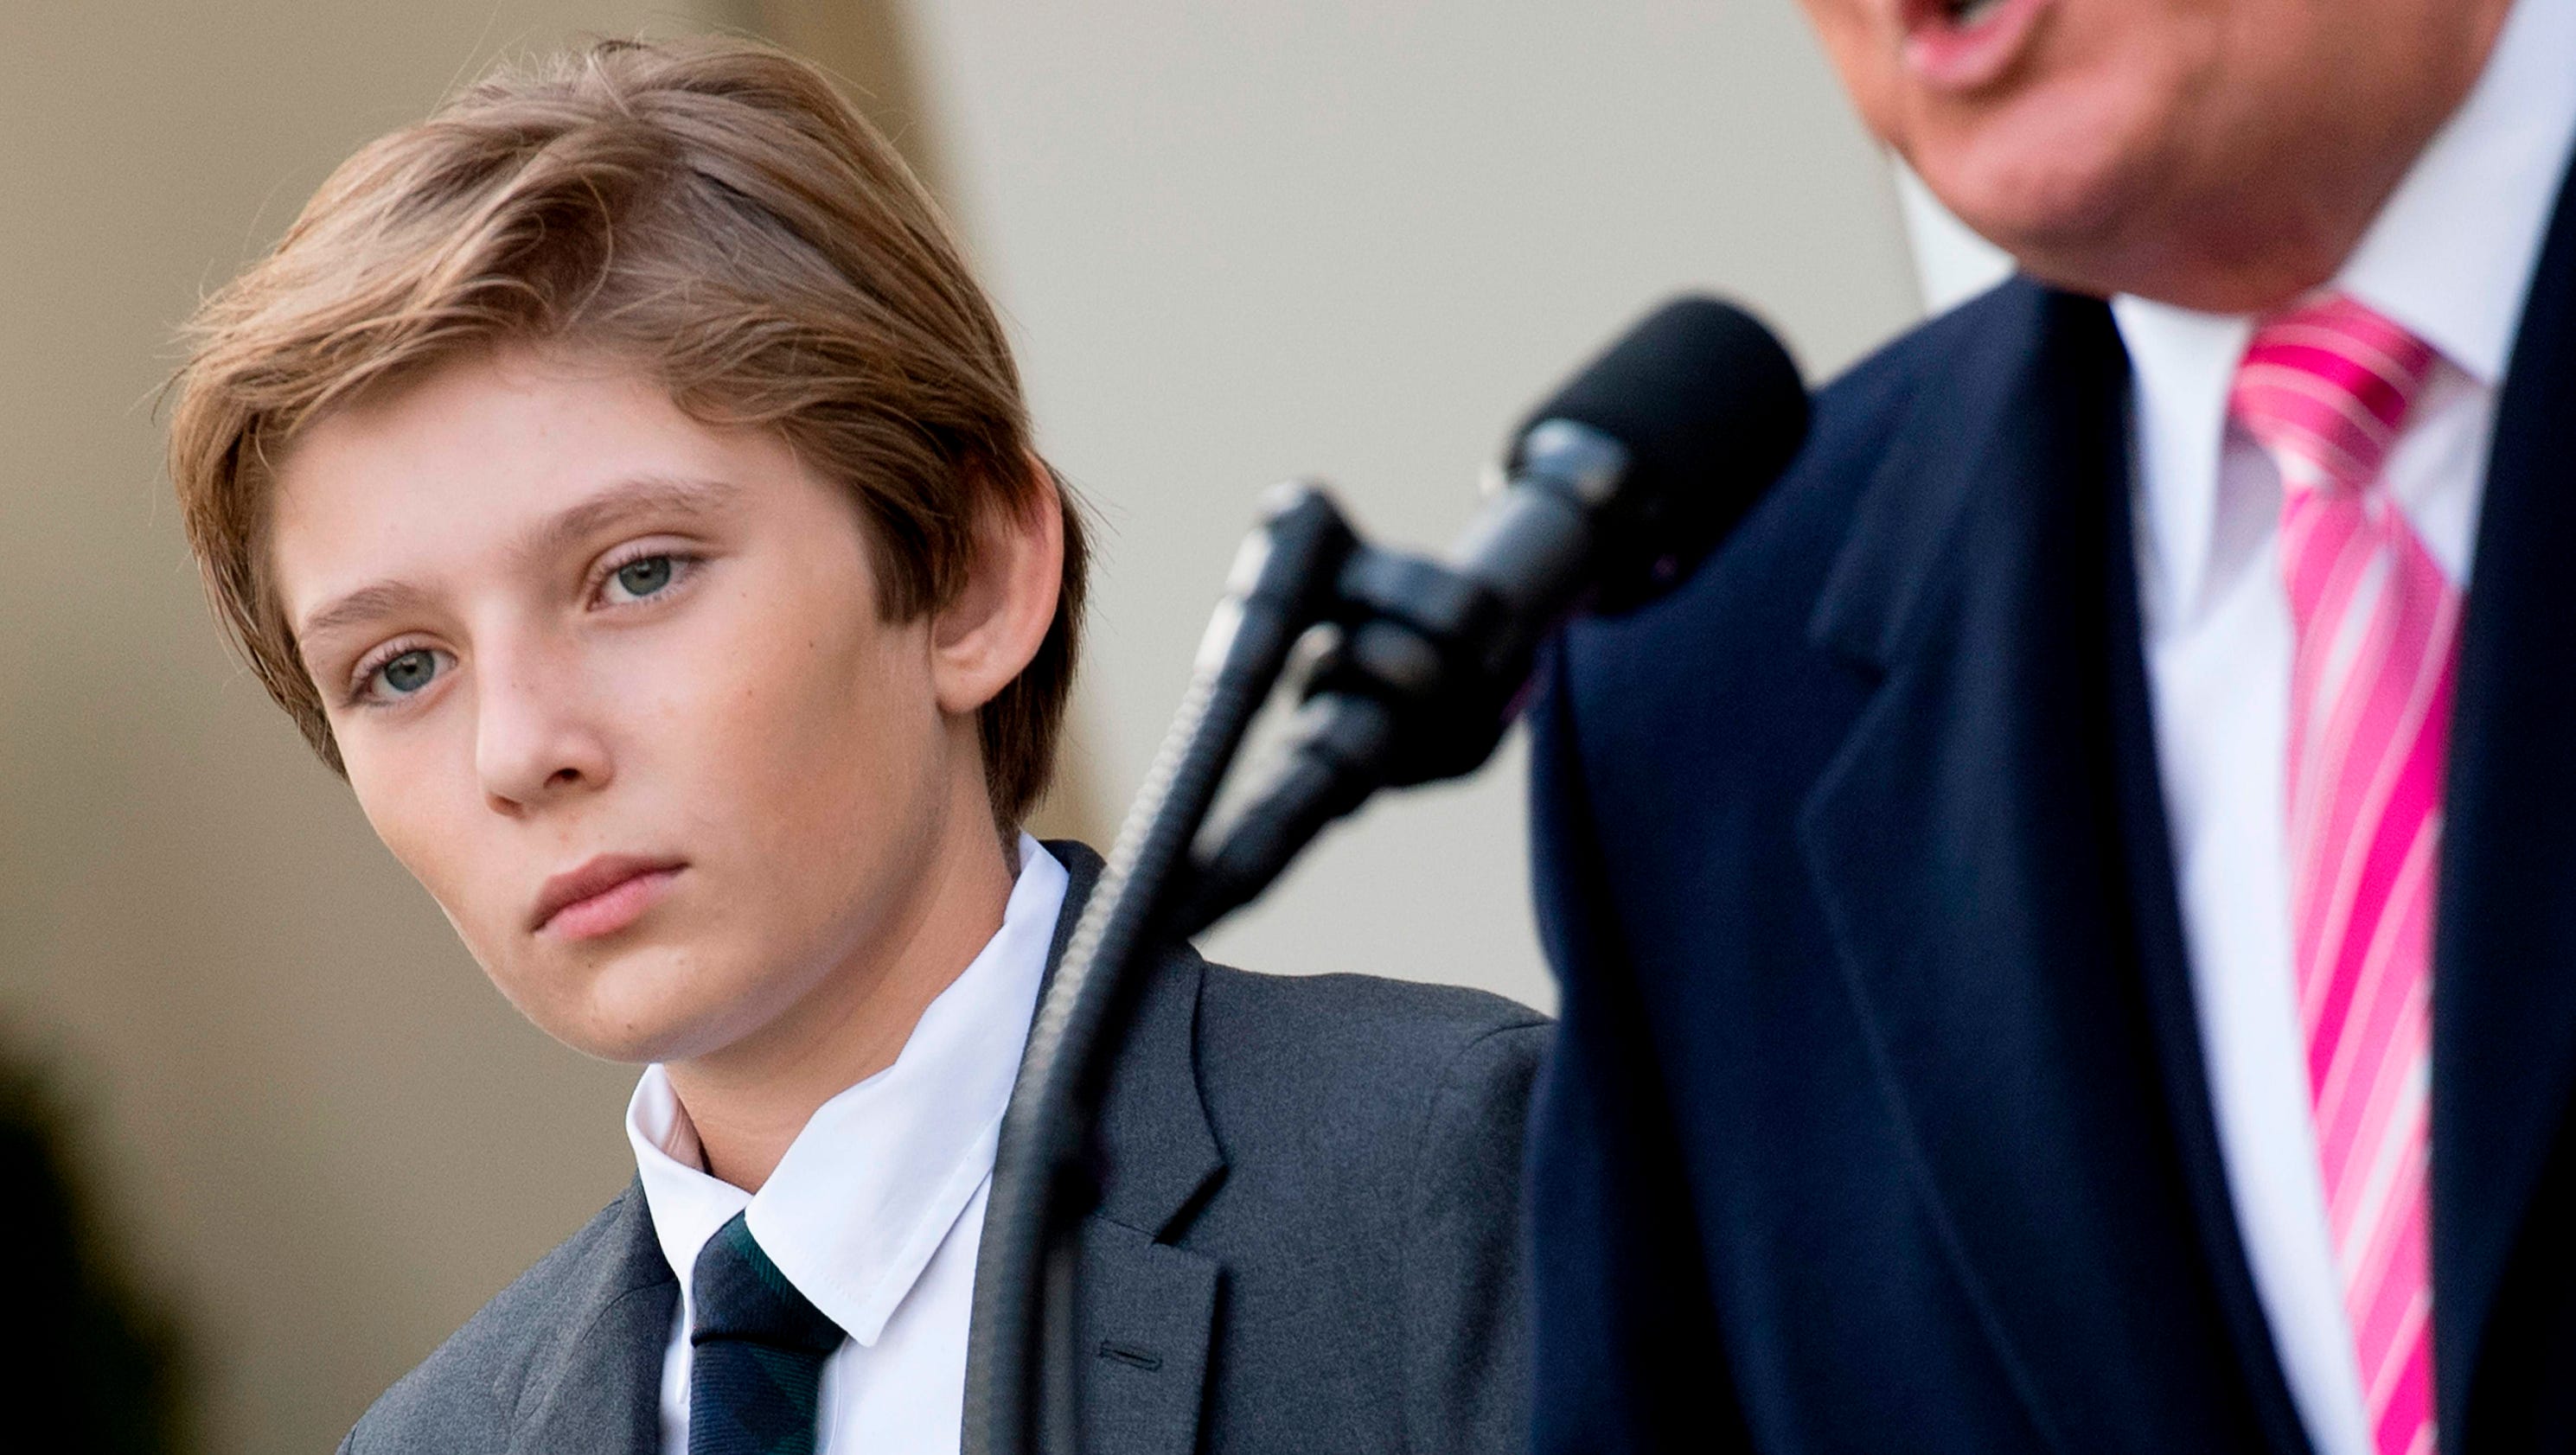 Barron Trump in the spotlight for holidays at White House